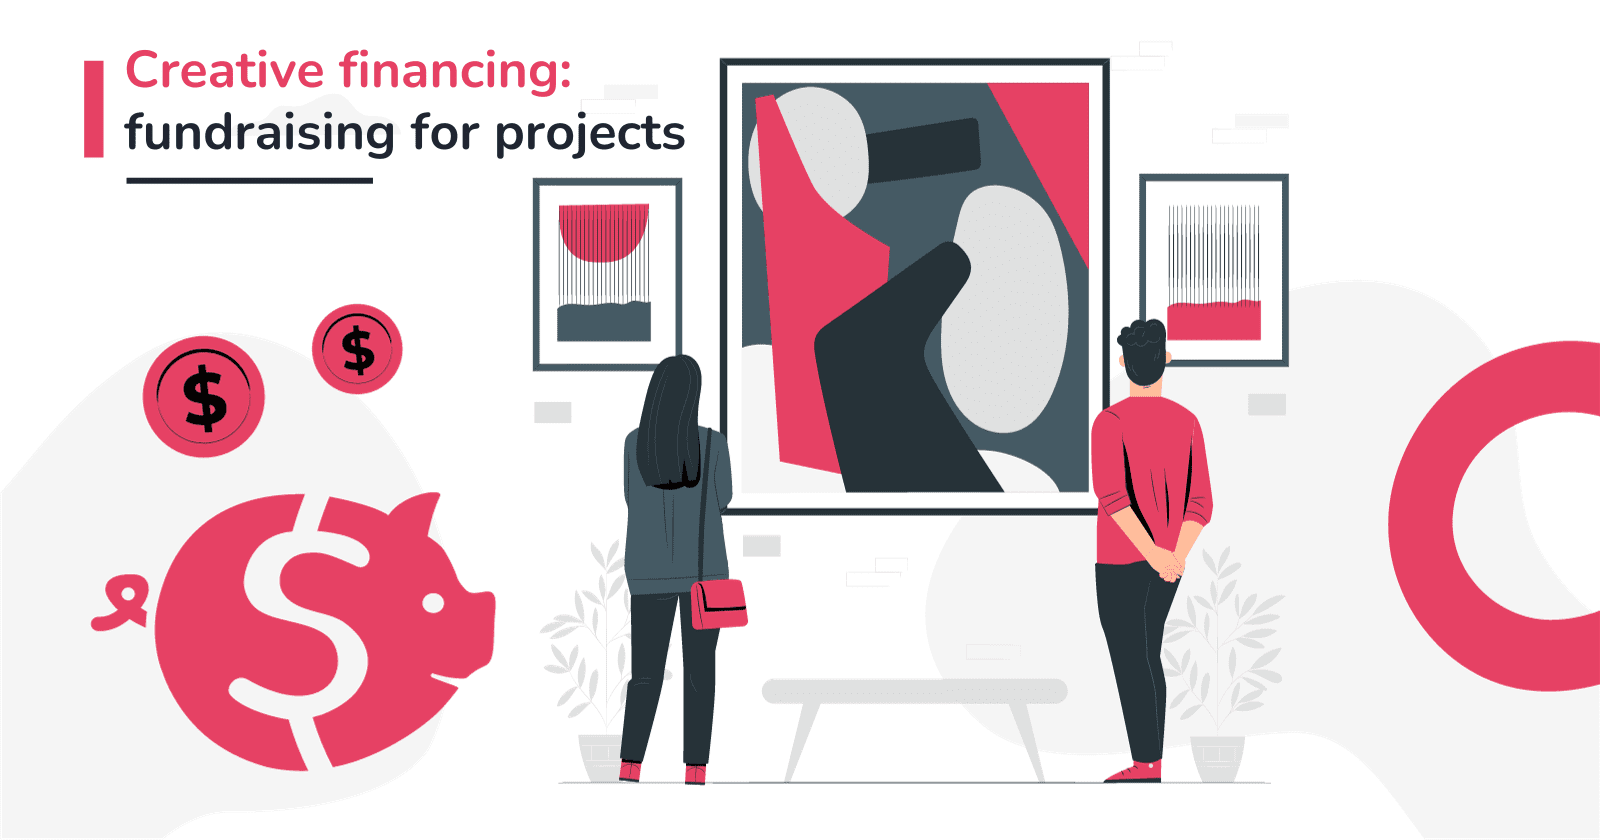 Creative financing: fundraising for projects